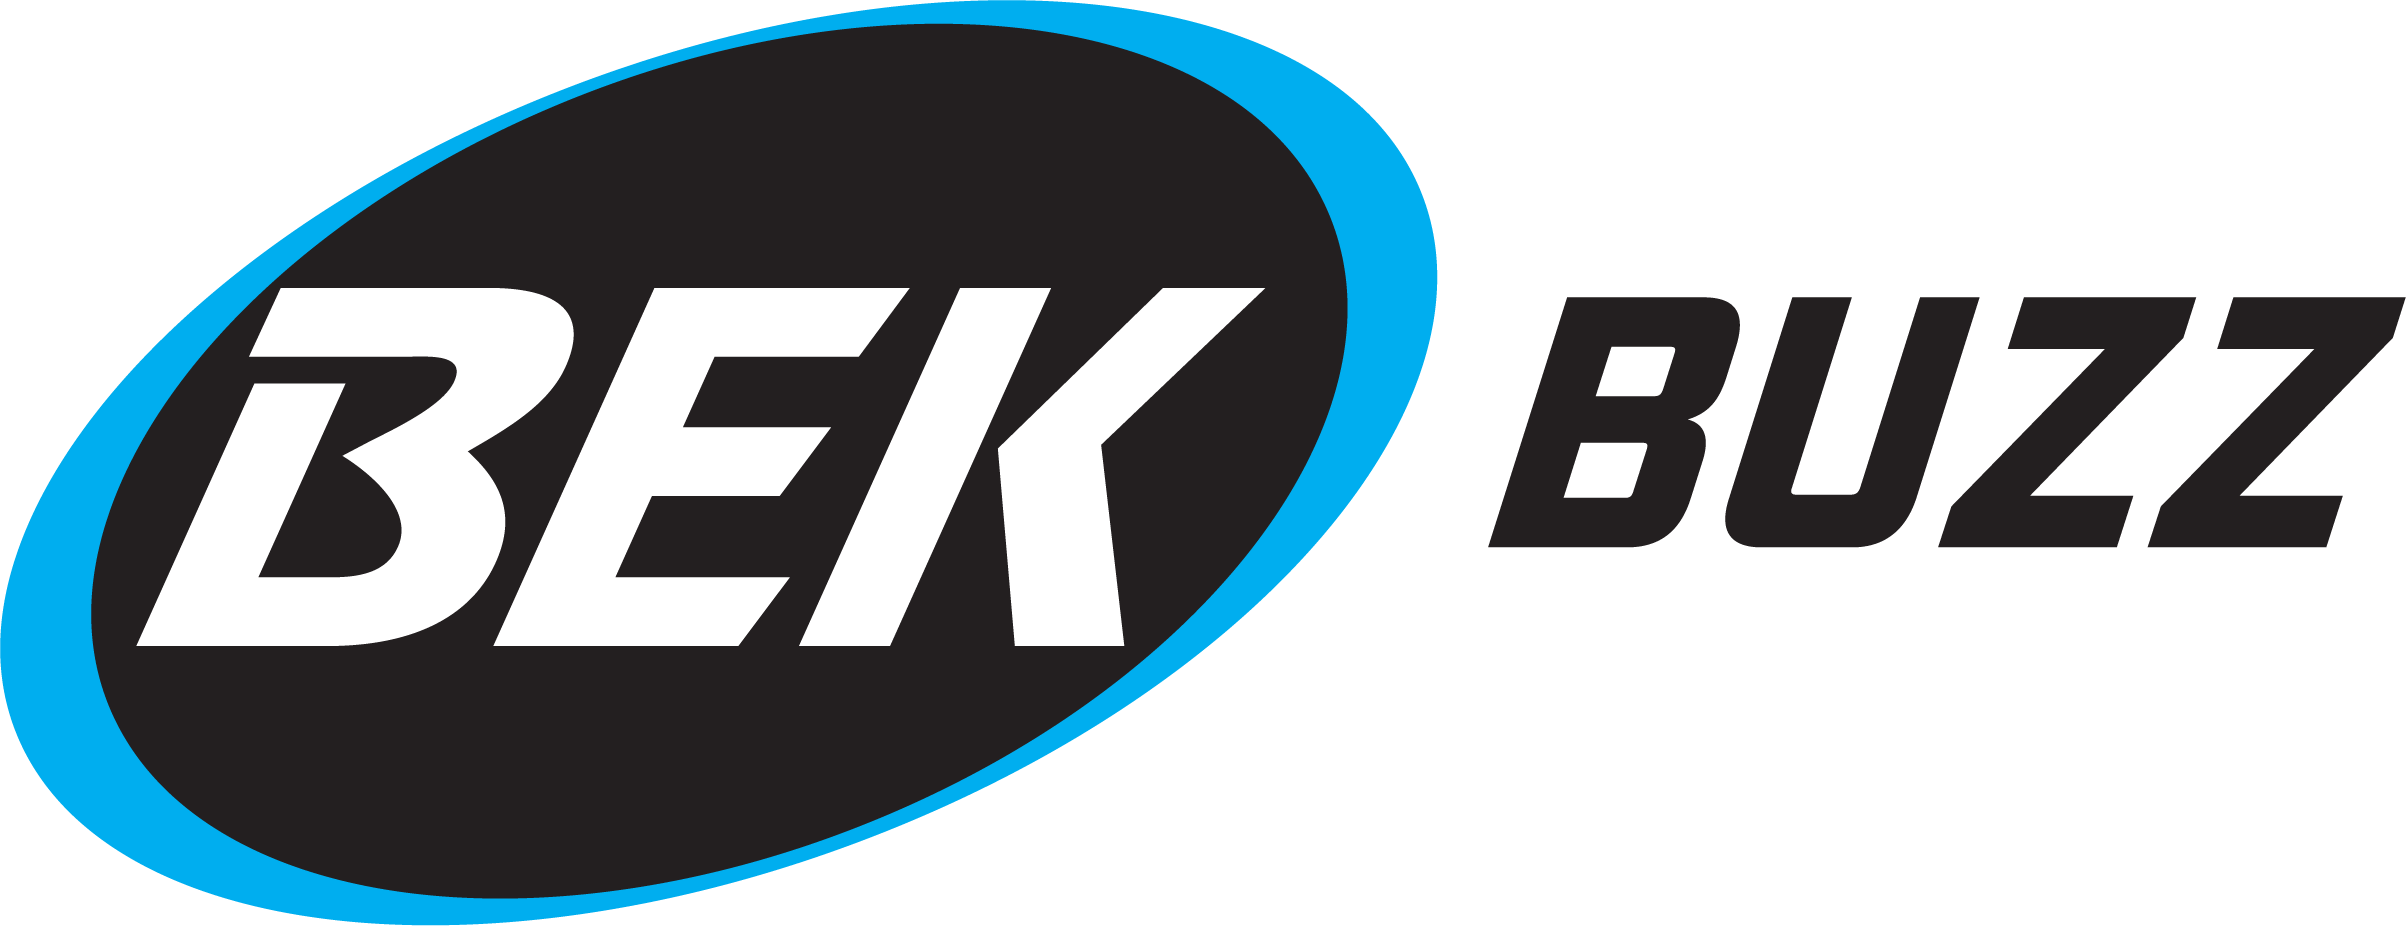 Introducing BEK Buzz: a One-Stop Destination for BEK TV Content and More